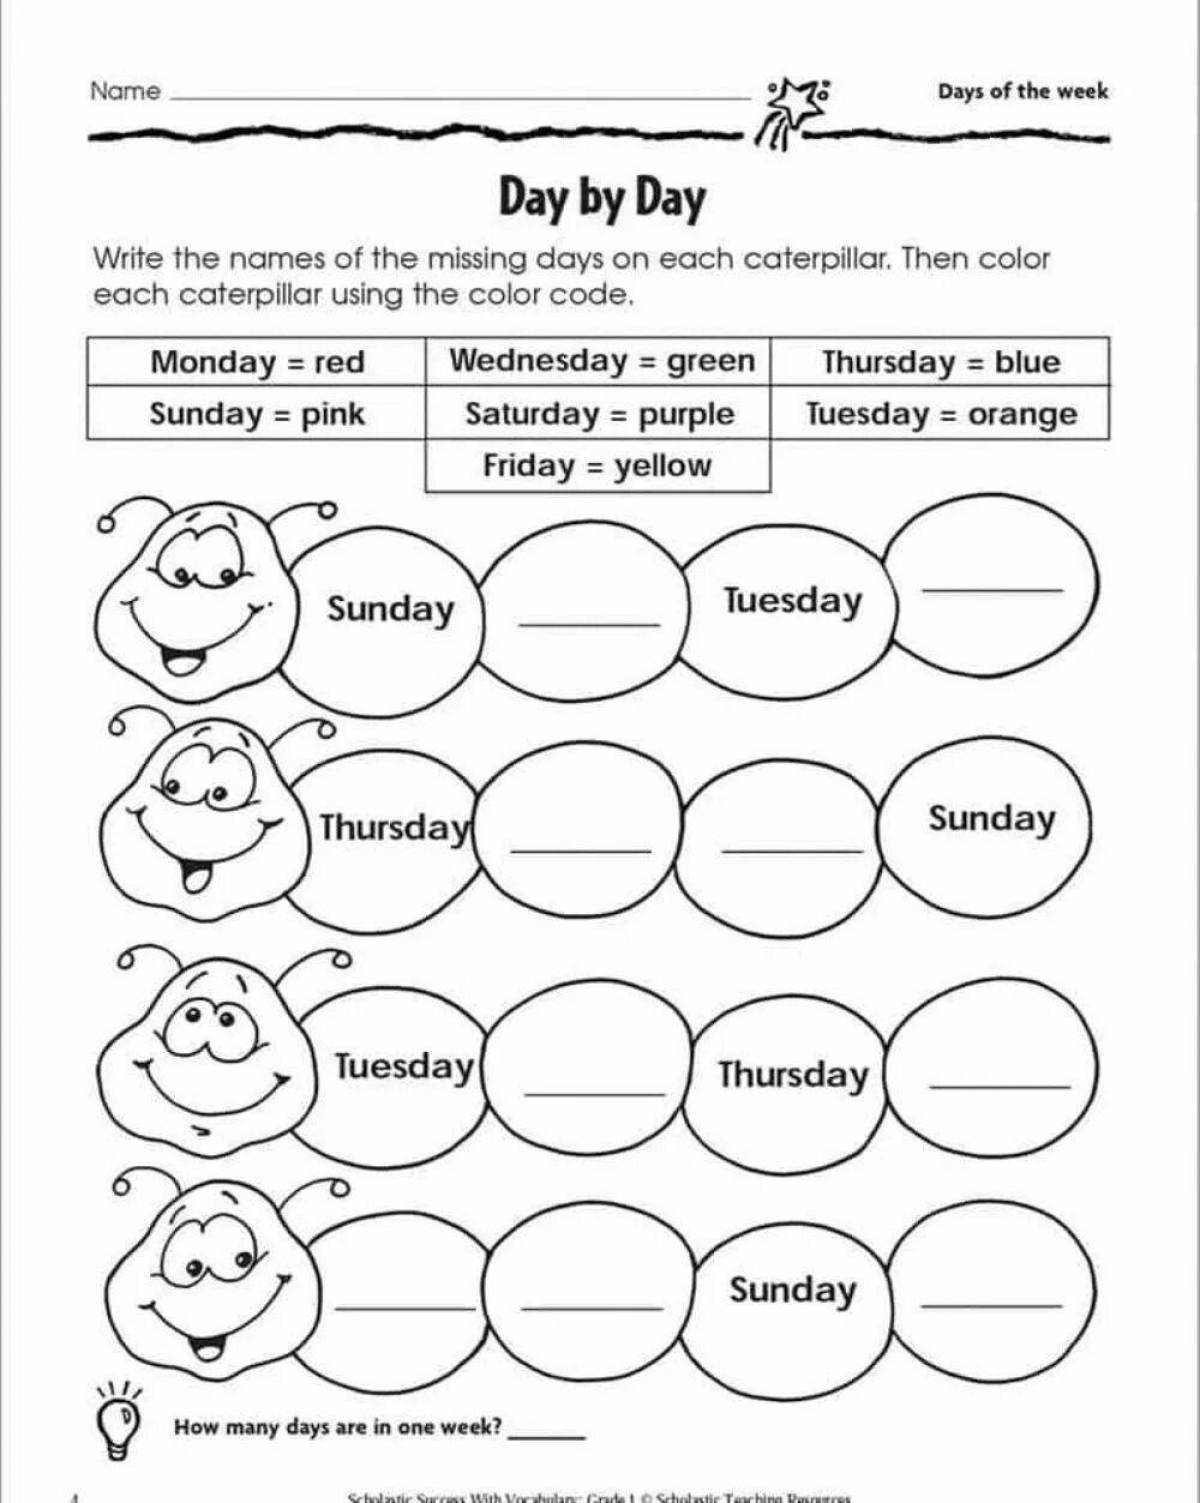 Entertaining coloring book days of the week in english